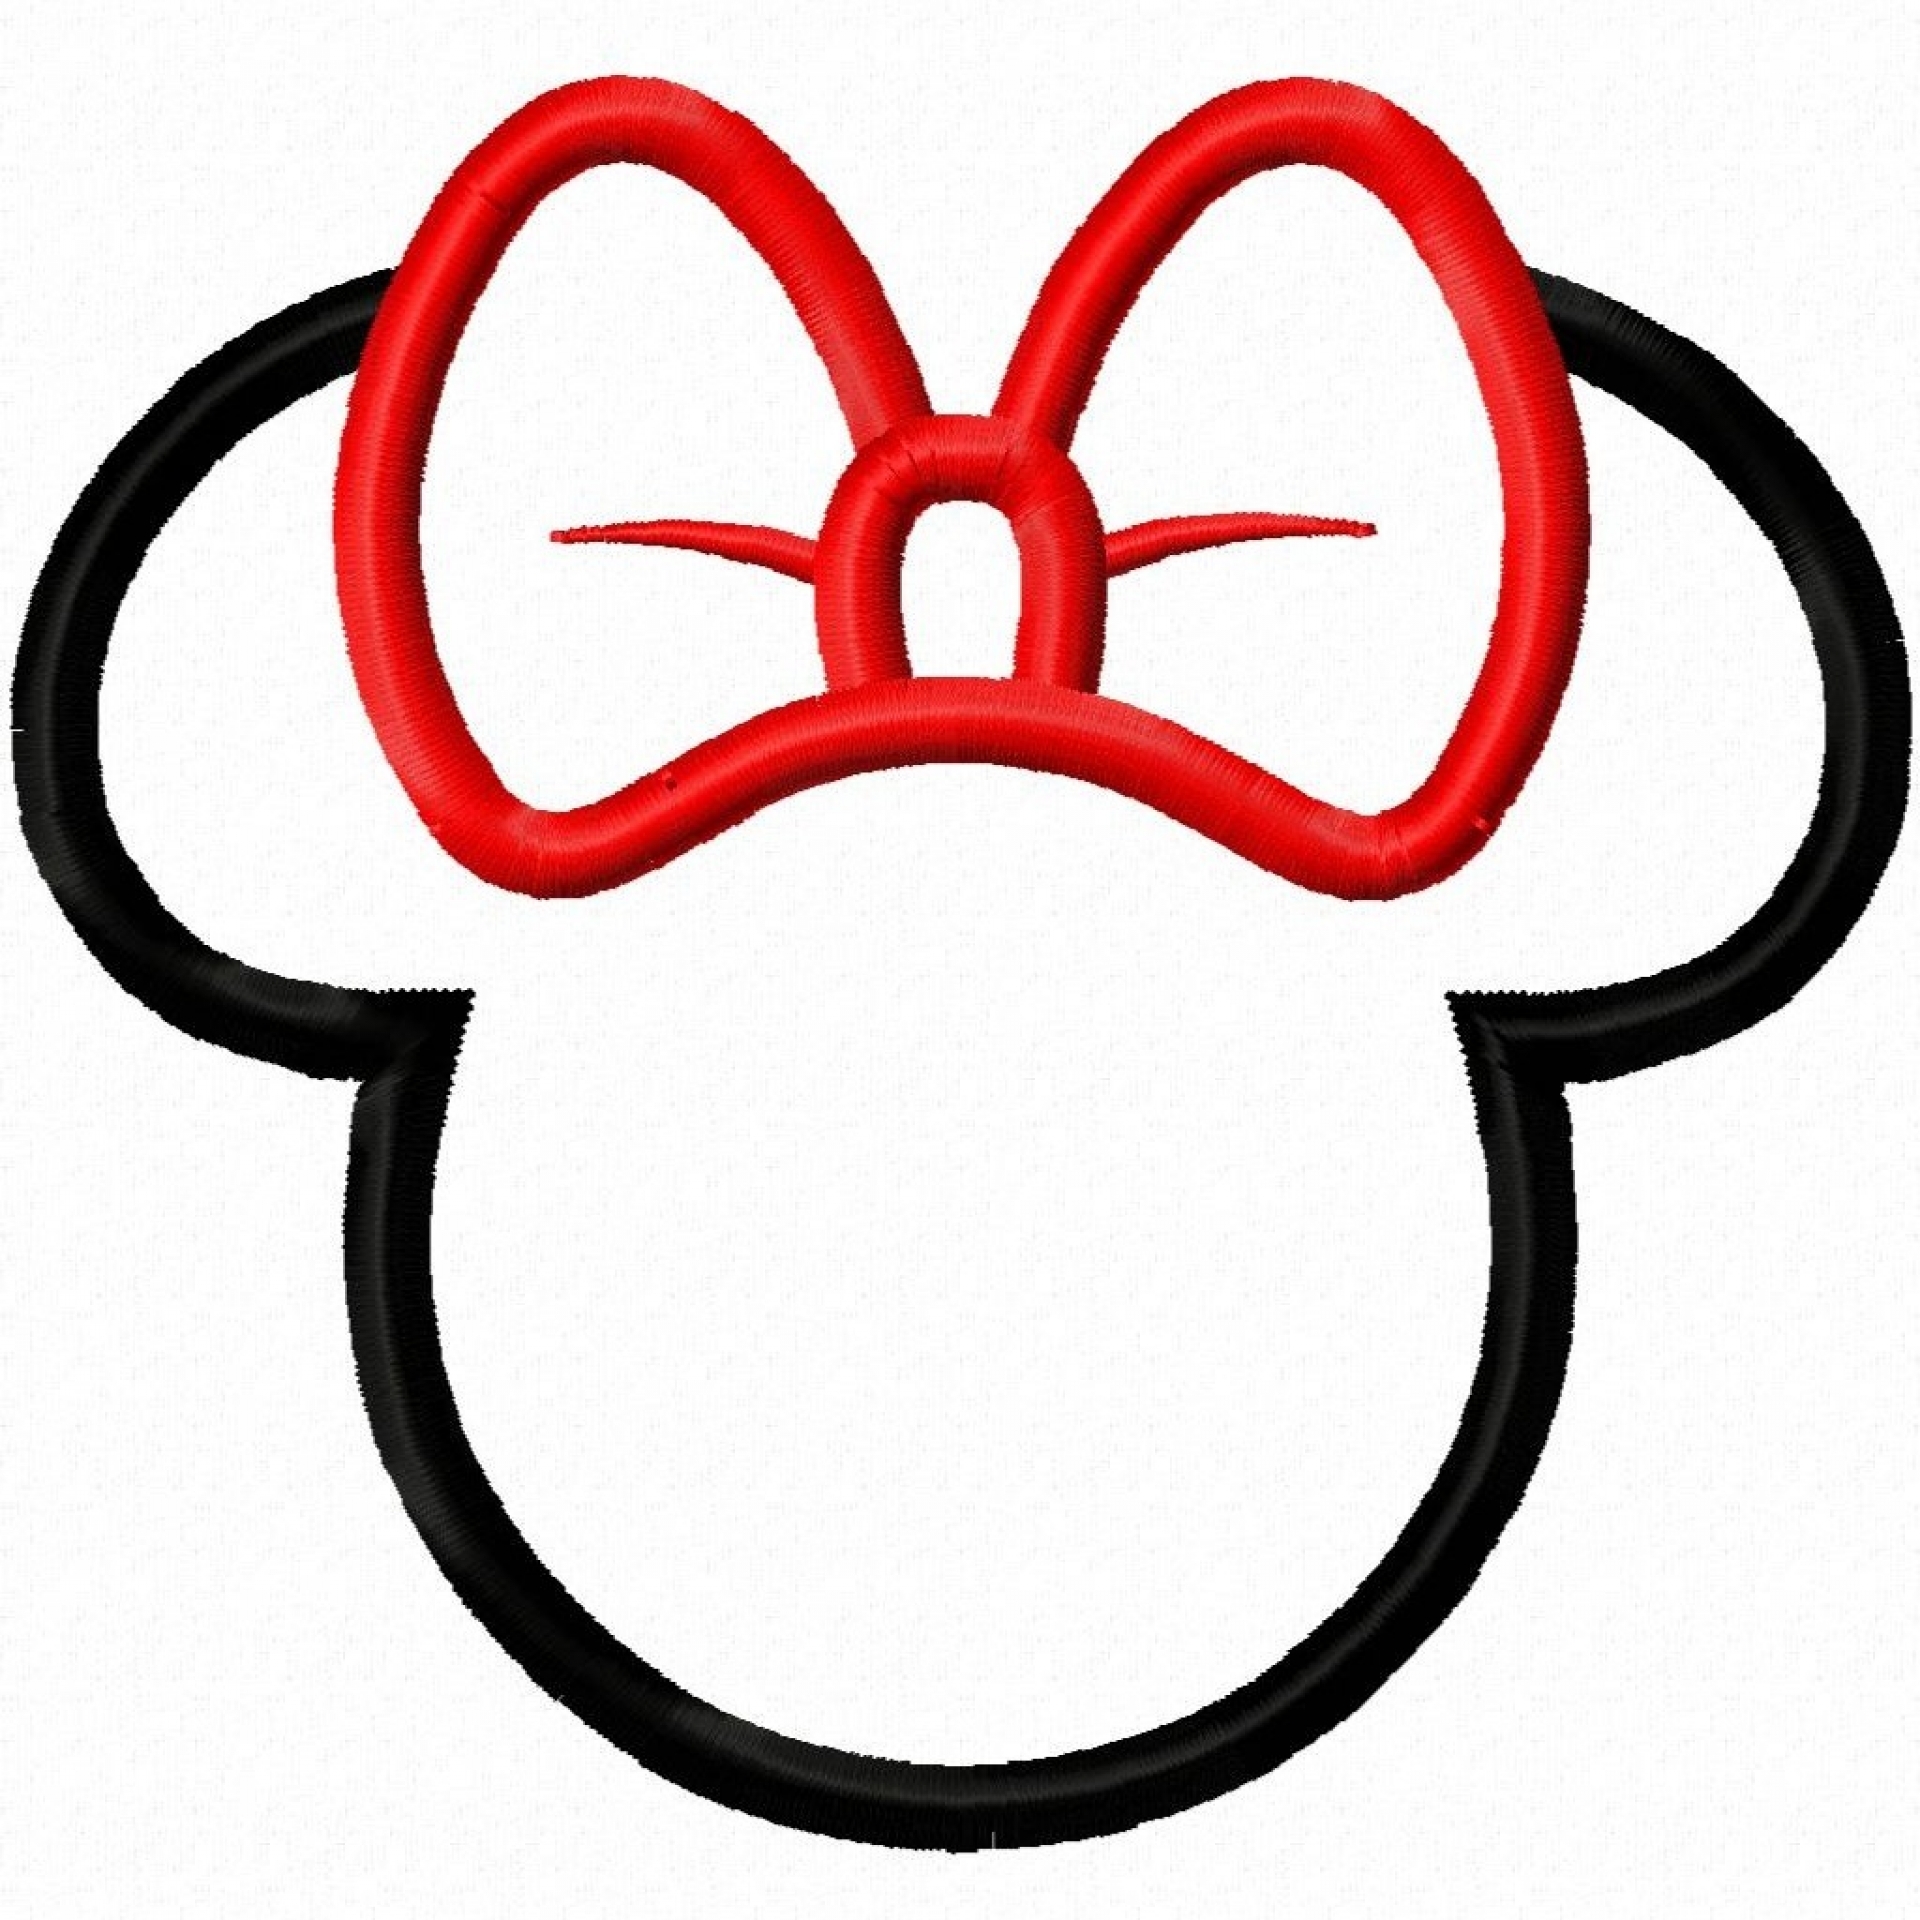 Minnie mouse ear clip art free clipart images